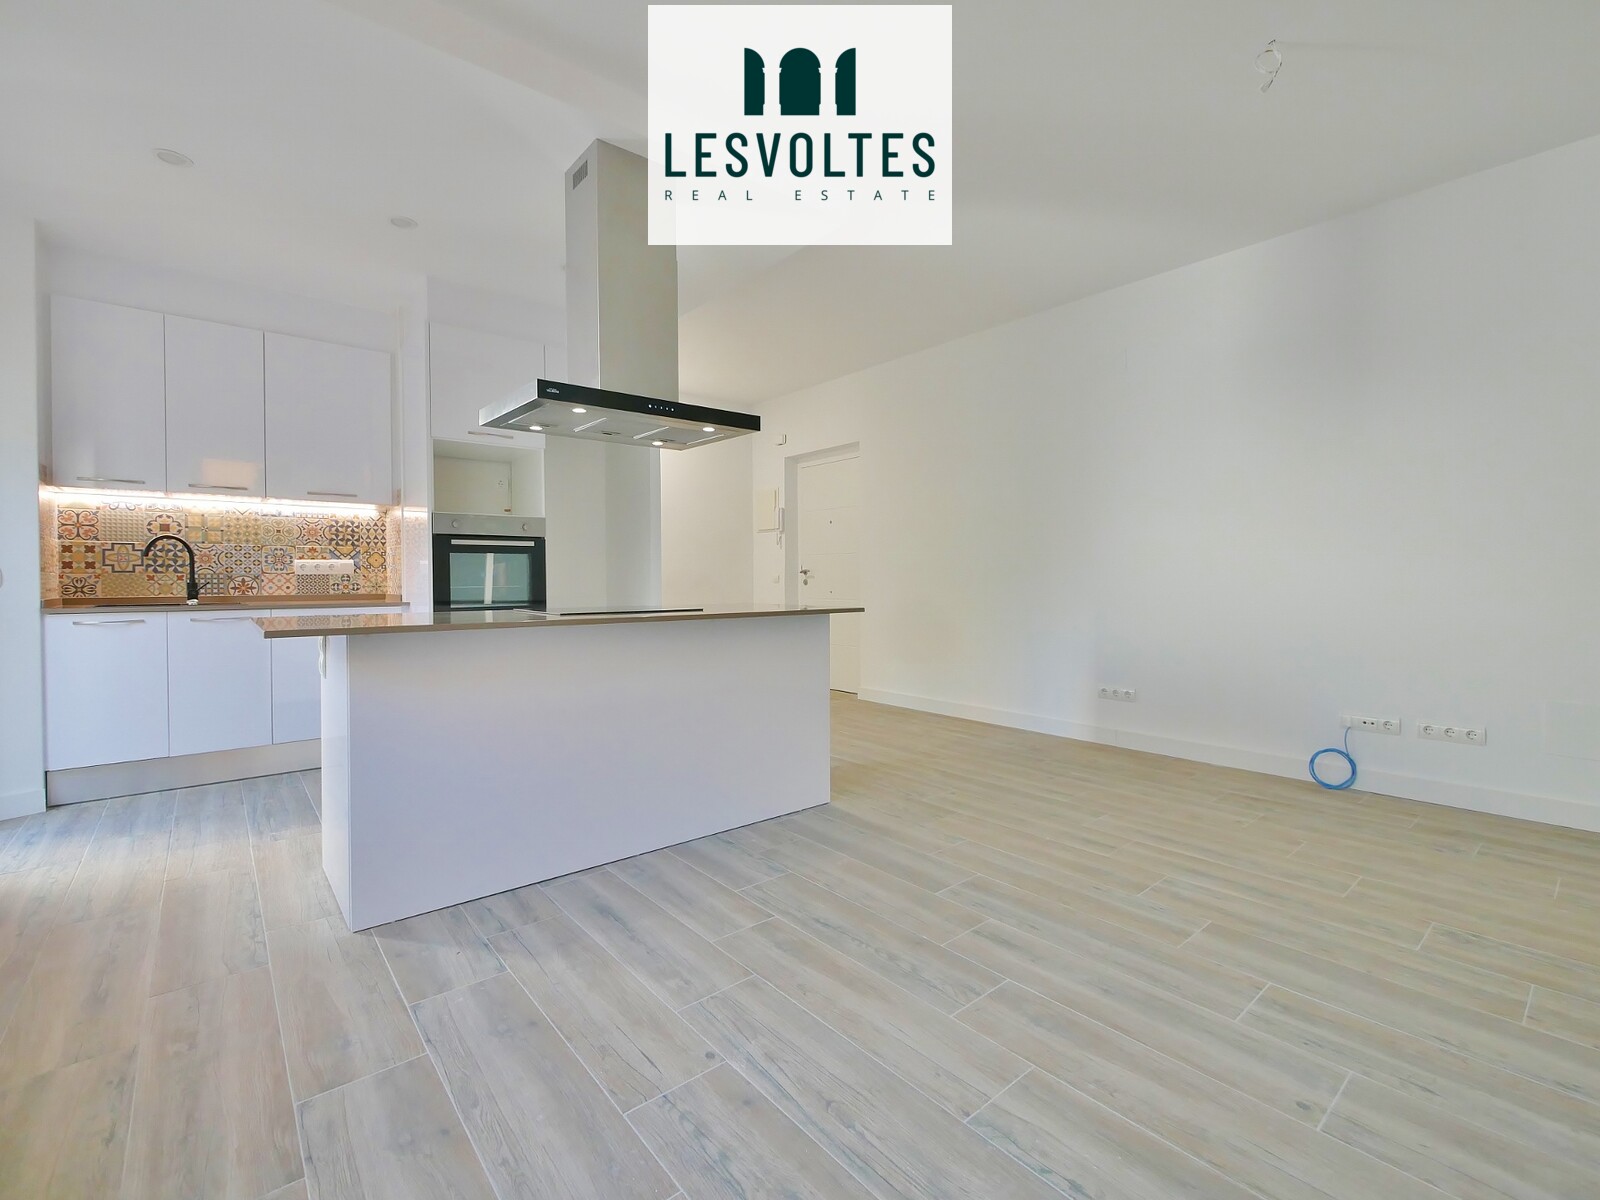 BRAND NEW APARTMENT TOTALLY EXTERIOR WITH 3 BEDROOMS IN PALAFRUGELL